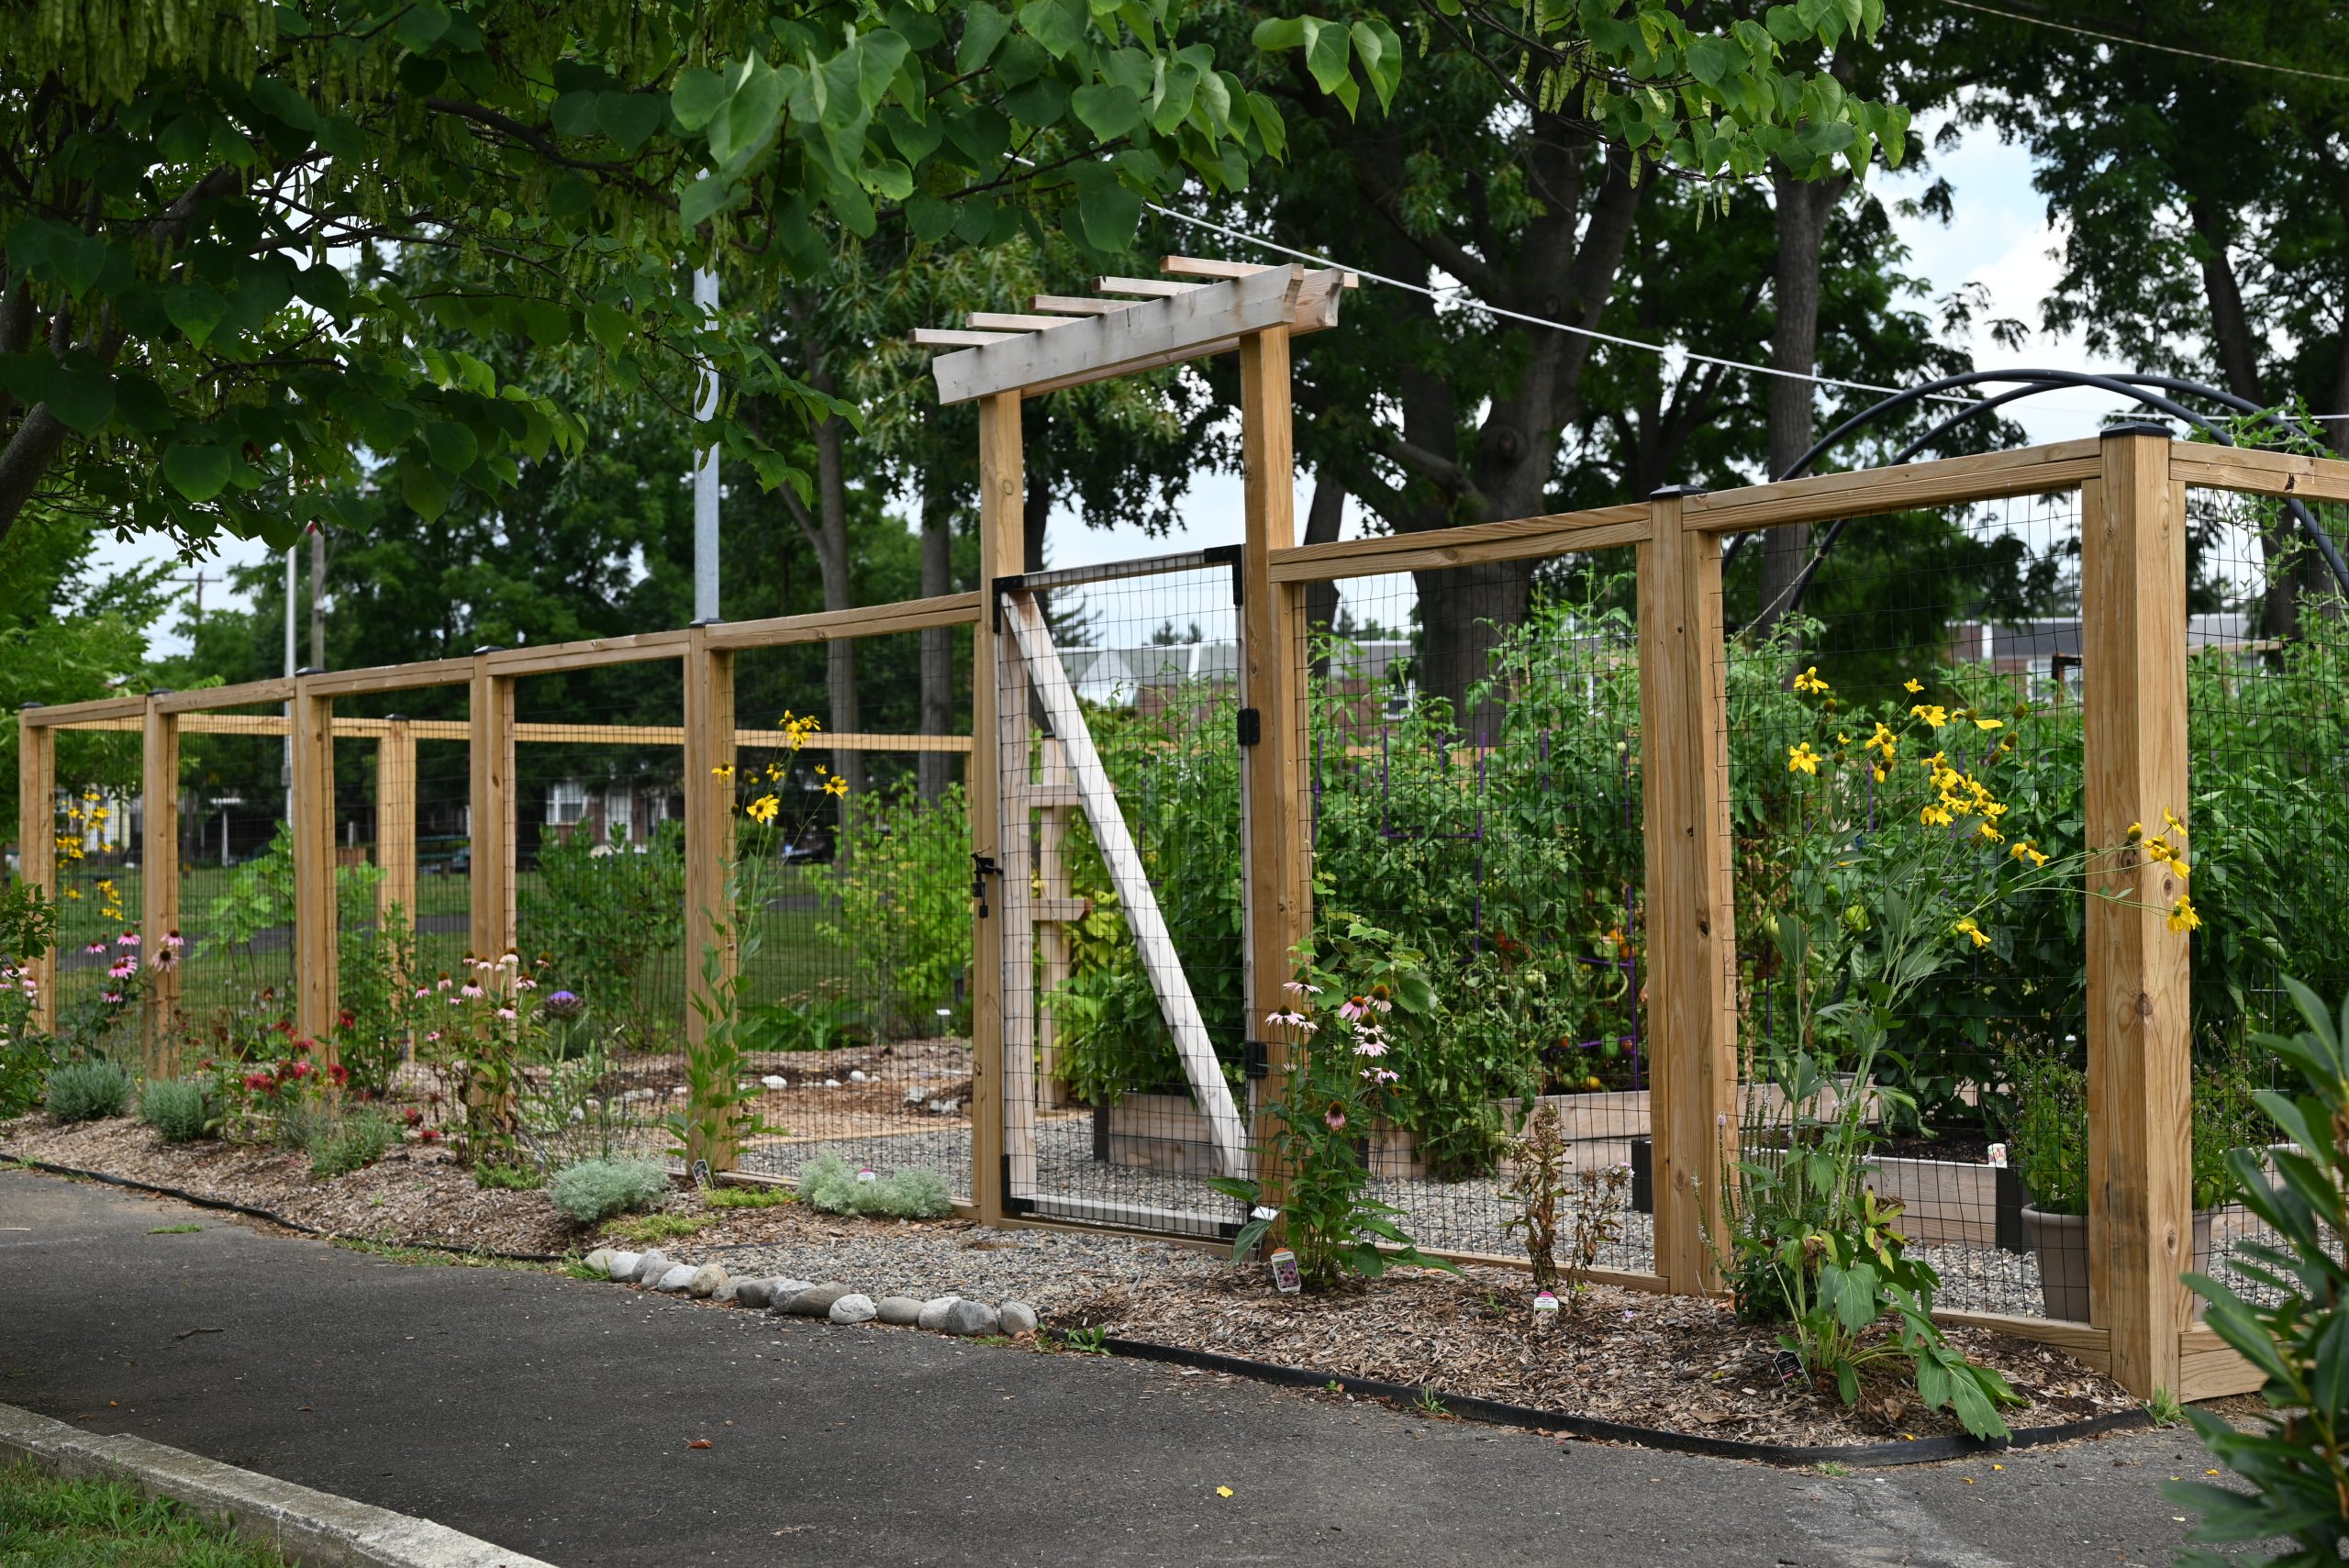 A community vegetable garden surrounded by a wooden panel fence with wire mesh designed to protect against pests. A wooden arbor frames the central gate.